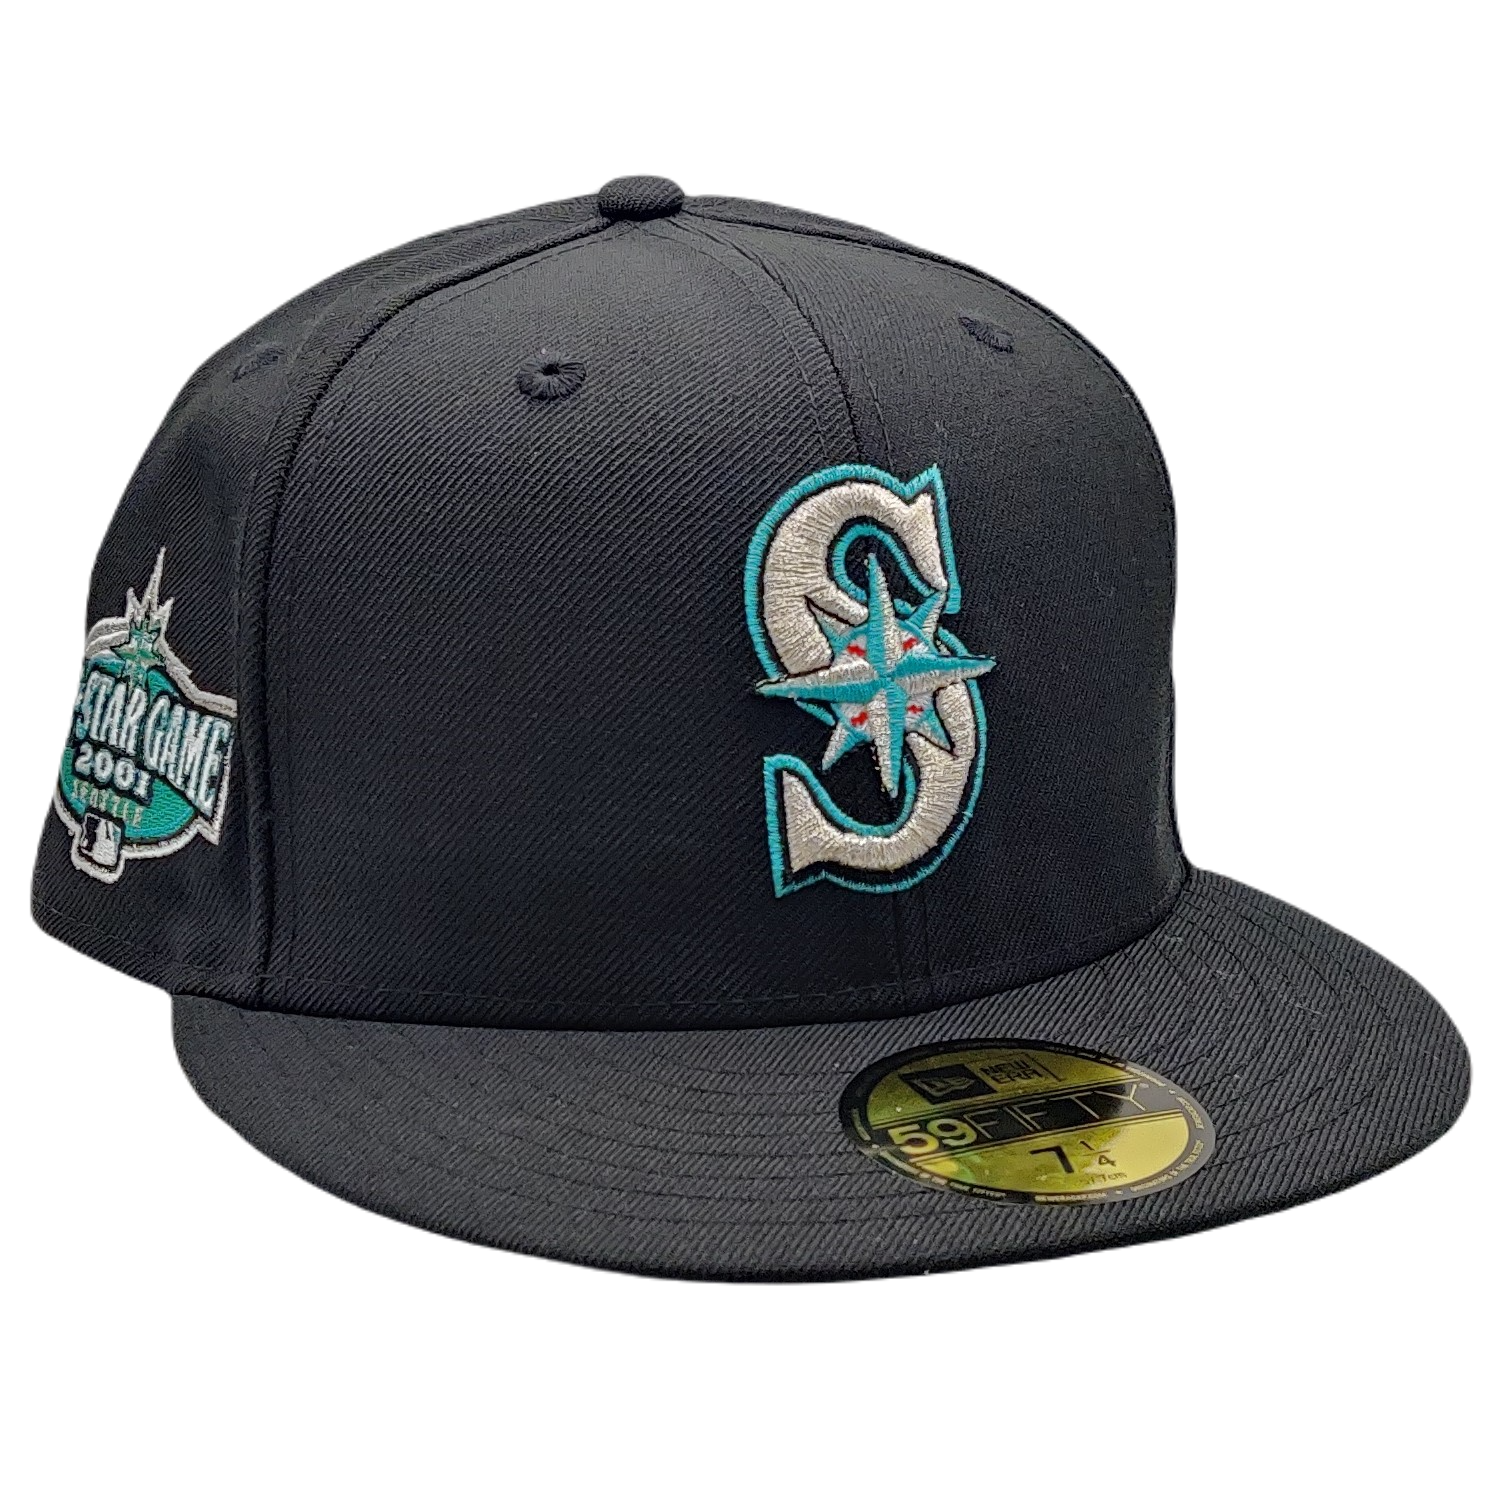 Seattle Mariners Fitted Hats  Seattle Mariners Baseball Fitted Caps